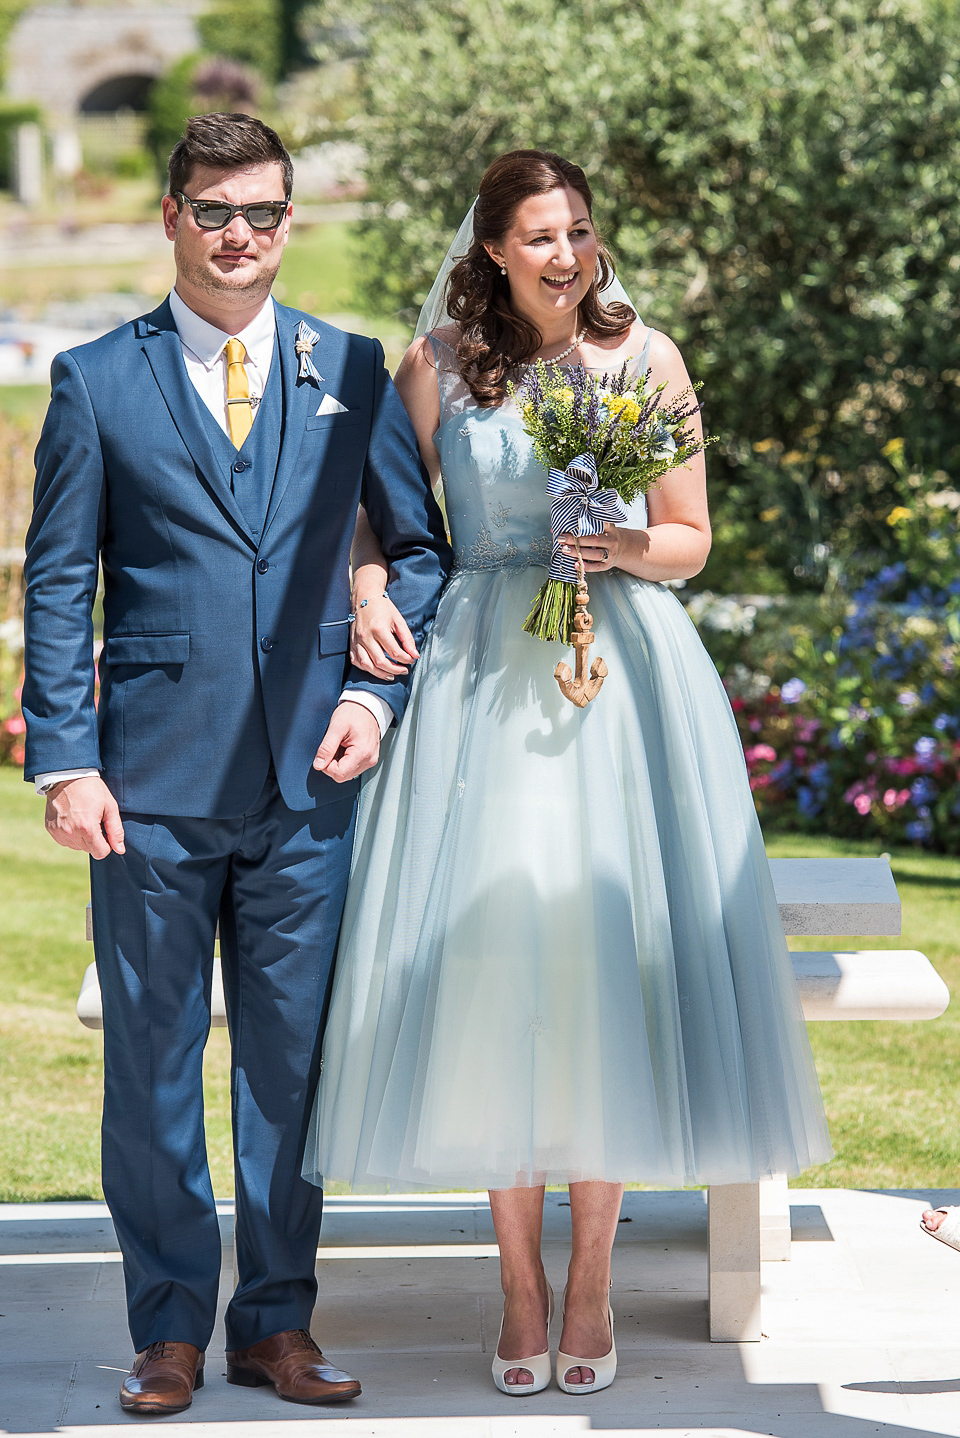 A pretty pale blue wedding dress for a nautical inspired Summer wedding by the sea. Photography by Alexandria Hall.